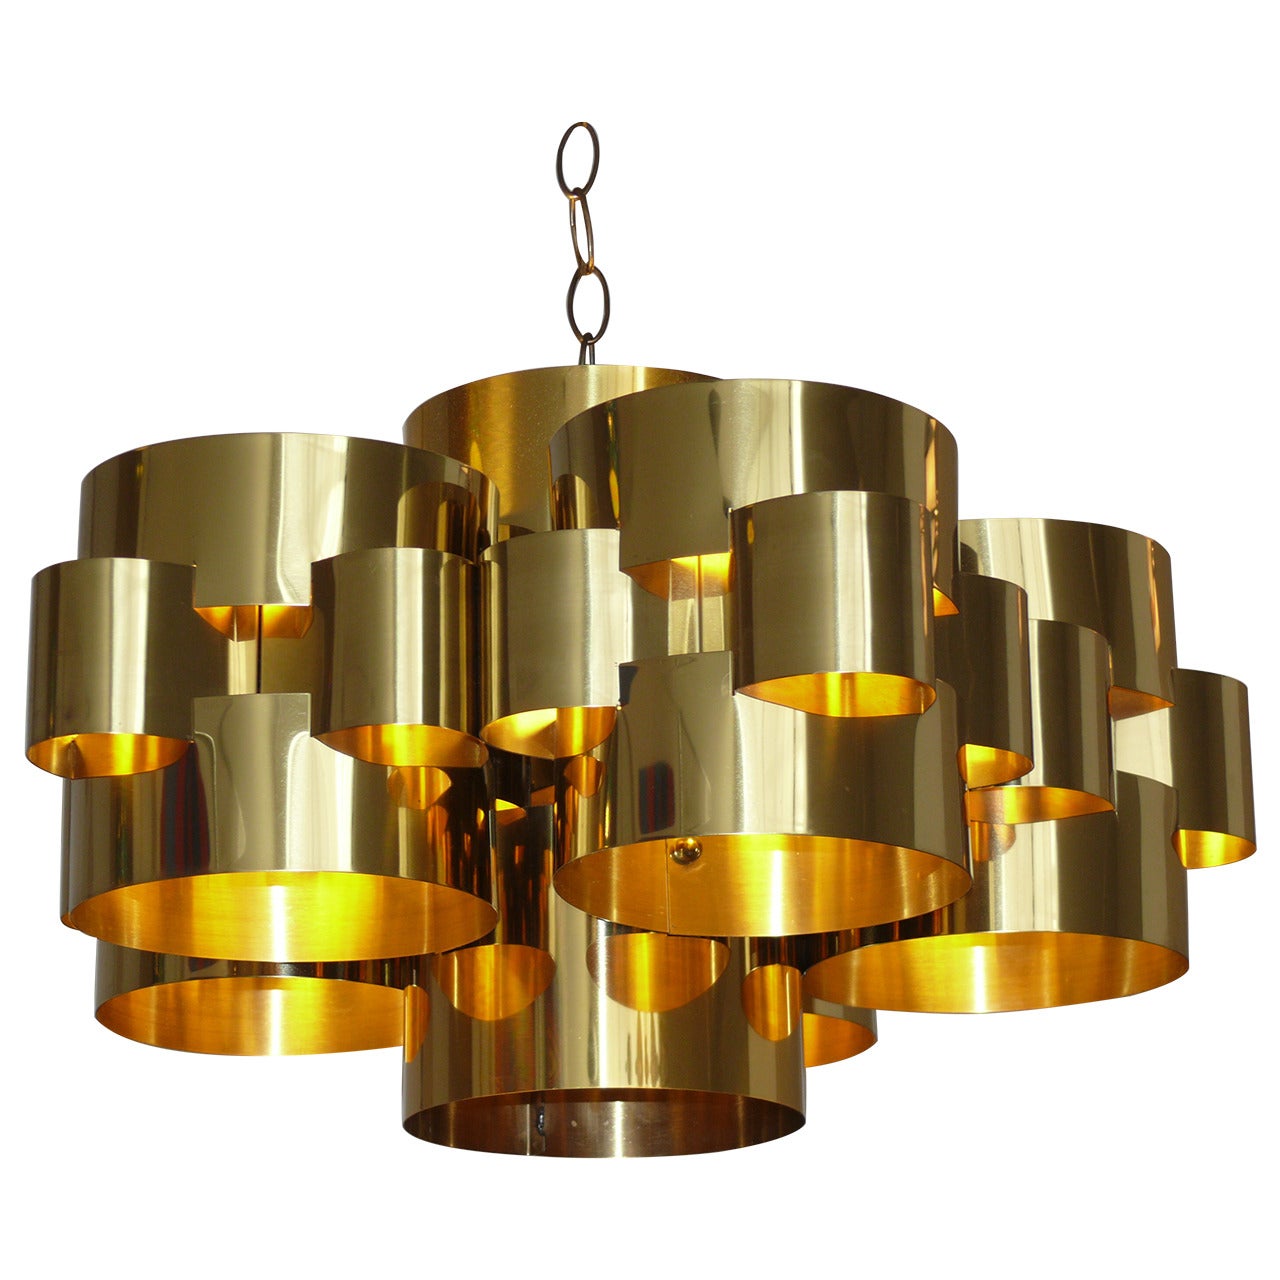 1970s Polished Brass 'Cloud' Chandelier by Curtis Jere